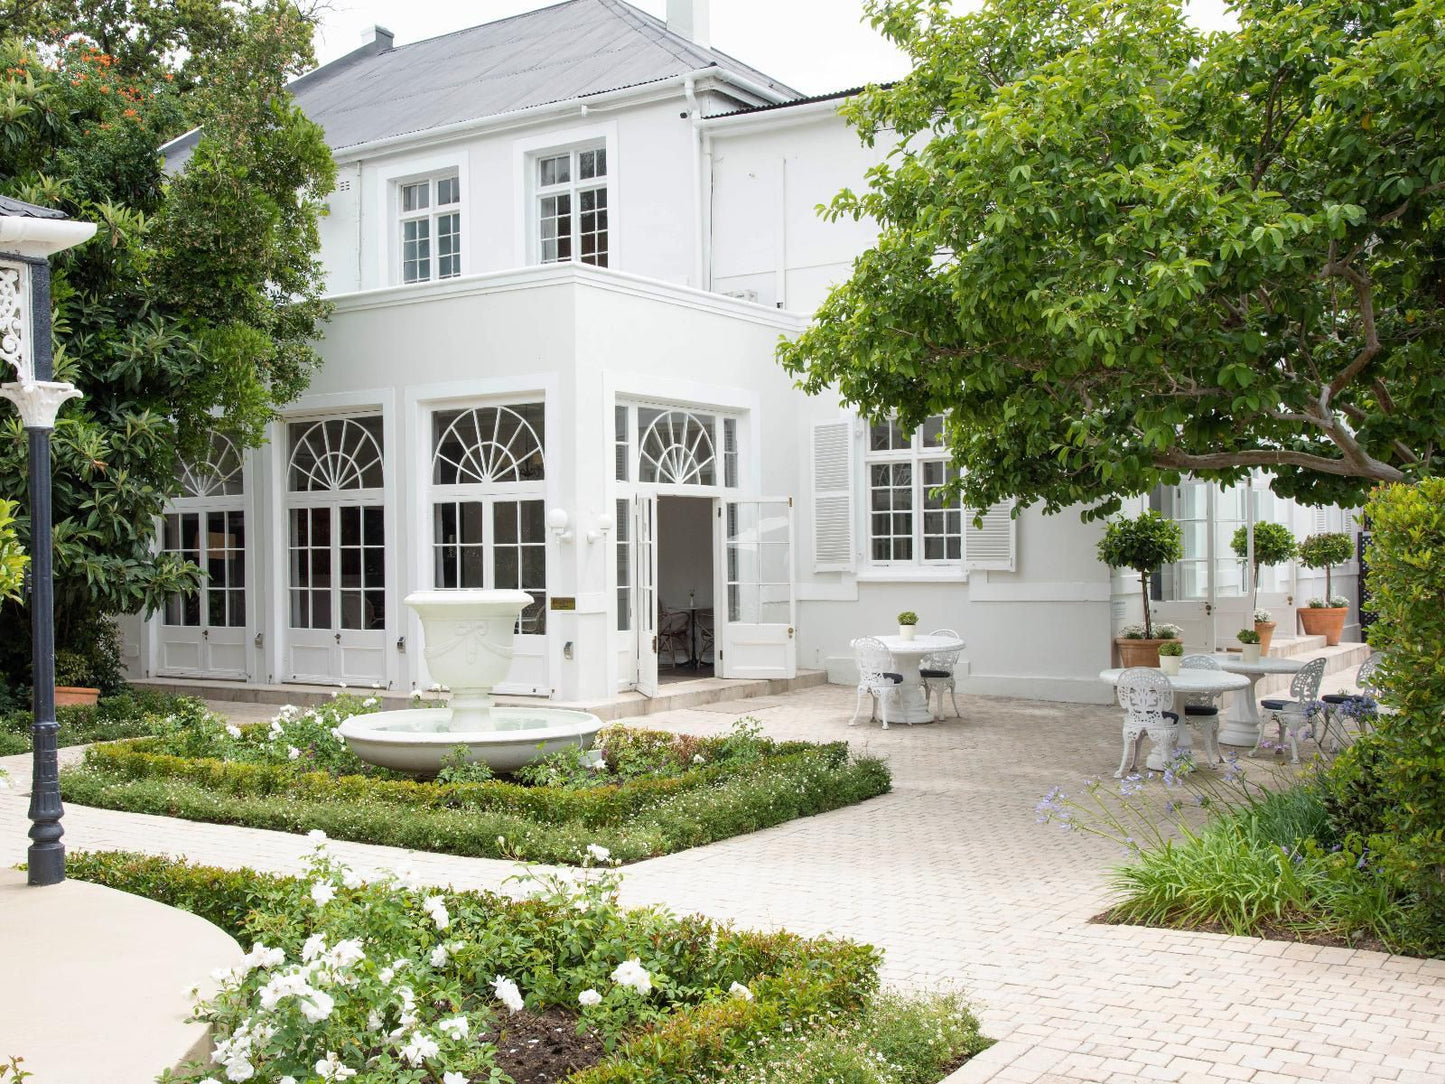 River Manor Boutique Hotel And Spa Stellenbosch Western Cape South Africa House, Building, Architecture, Garden, Nature, Plant